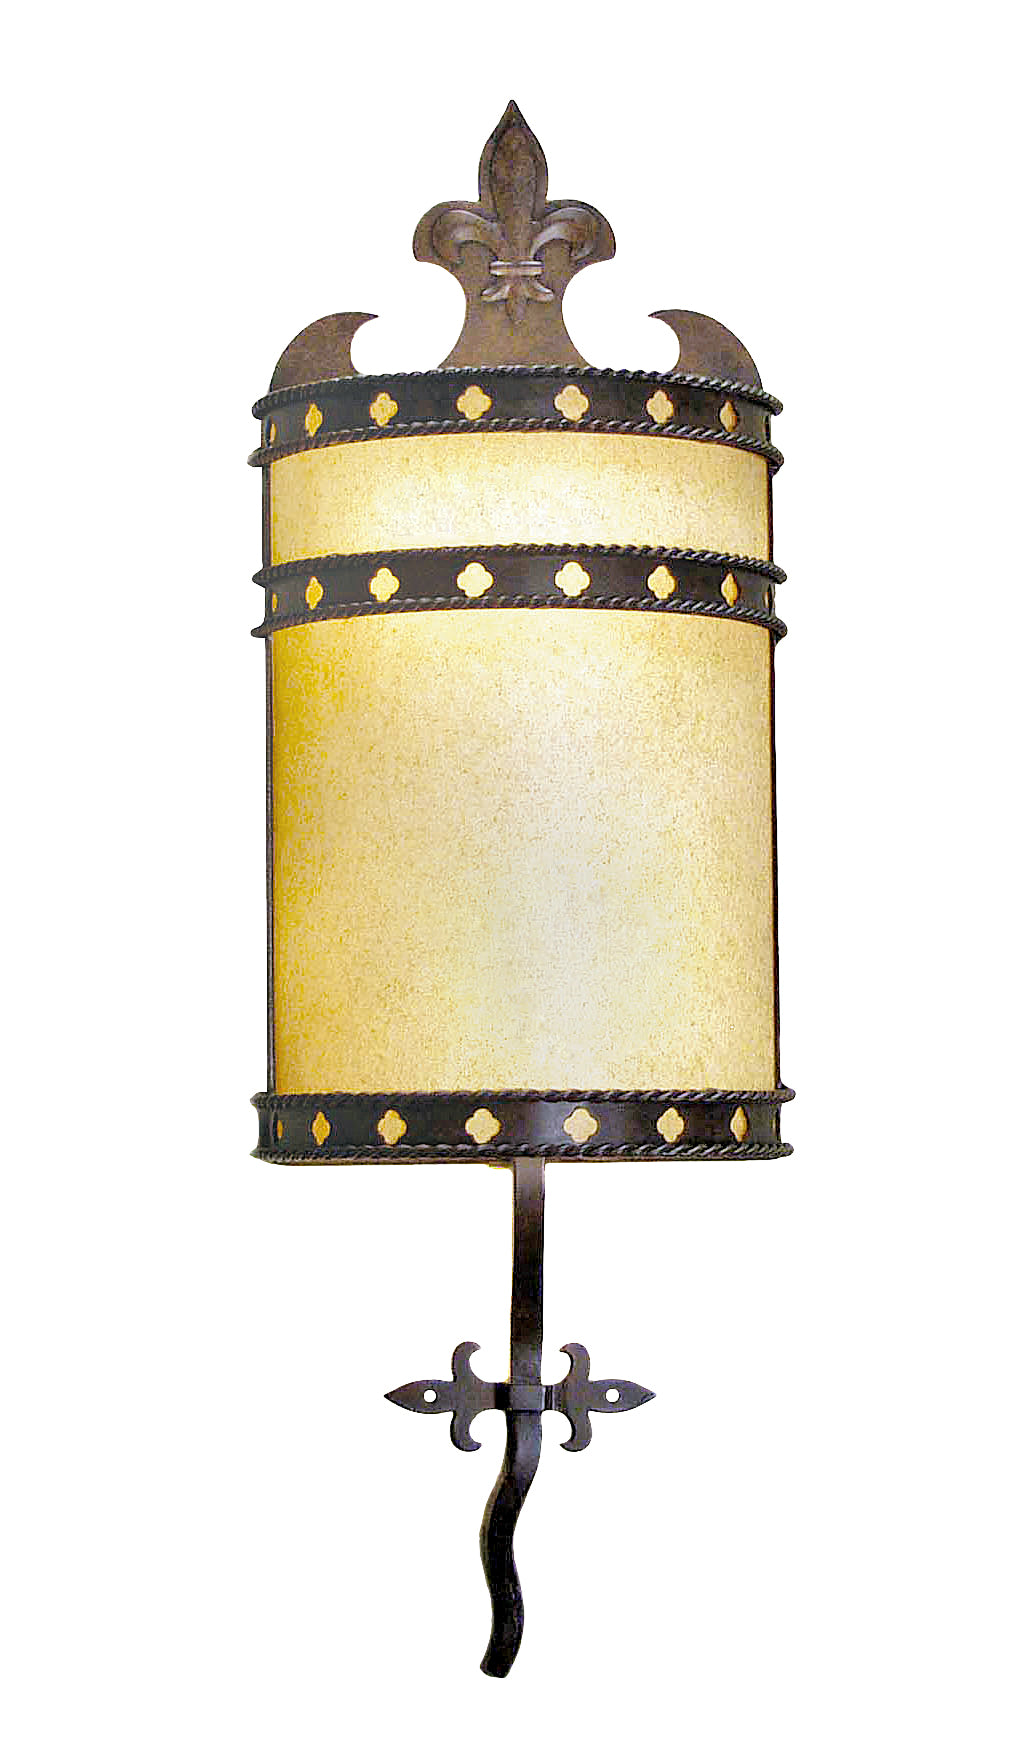 8" Stanza Wall Sconce by 2nd Ave Lighting